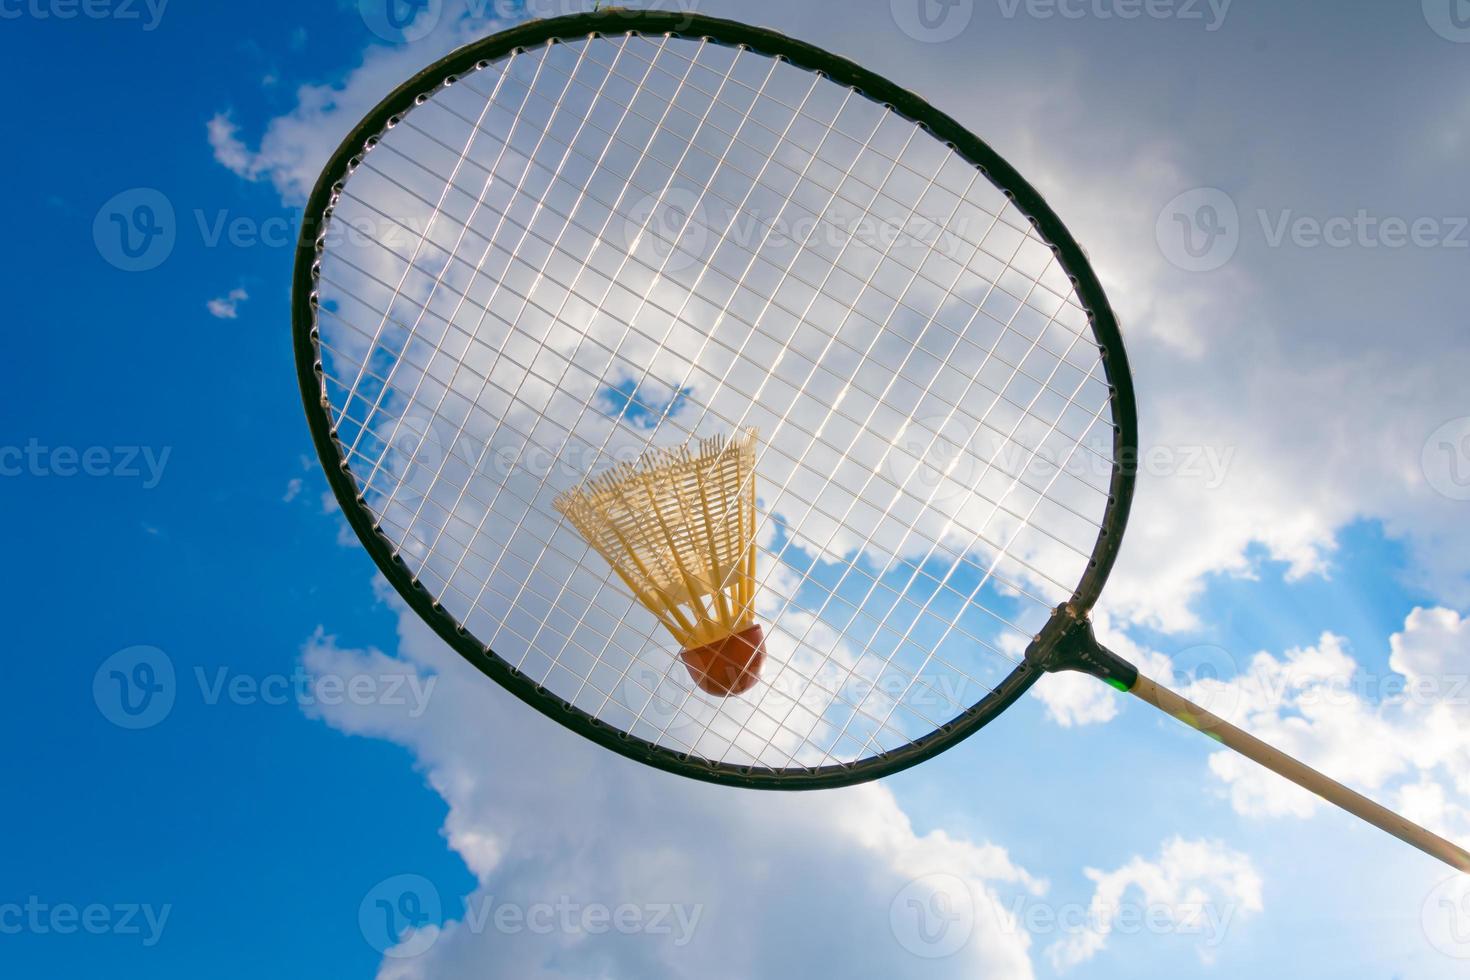 Badminton racket with a view of the sky photo